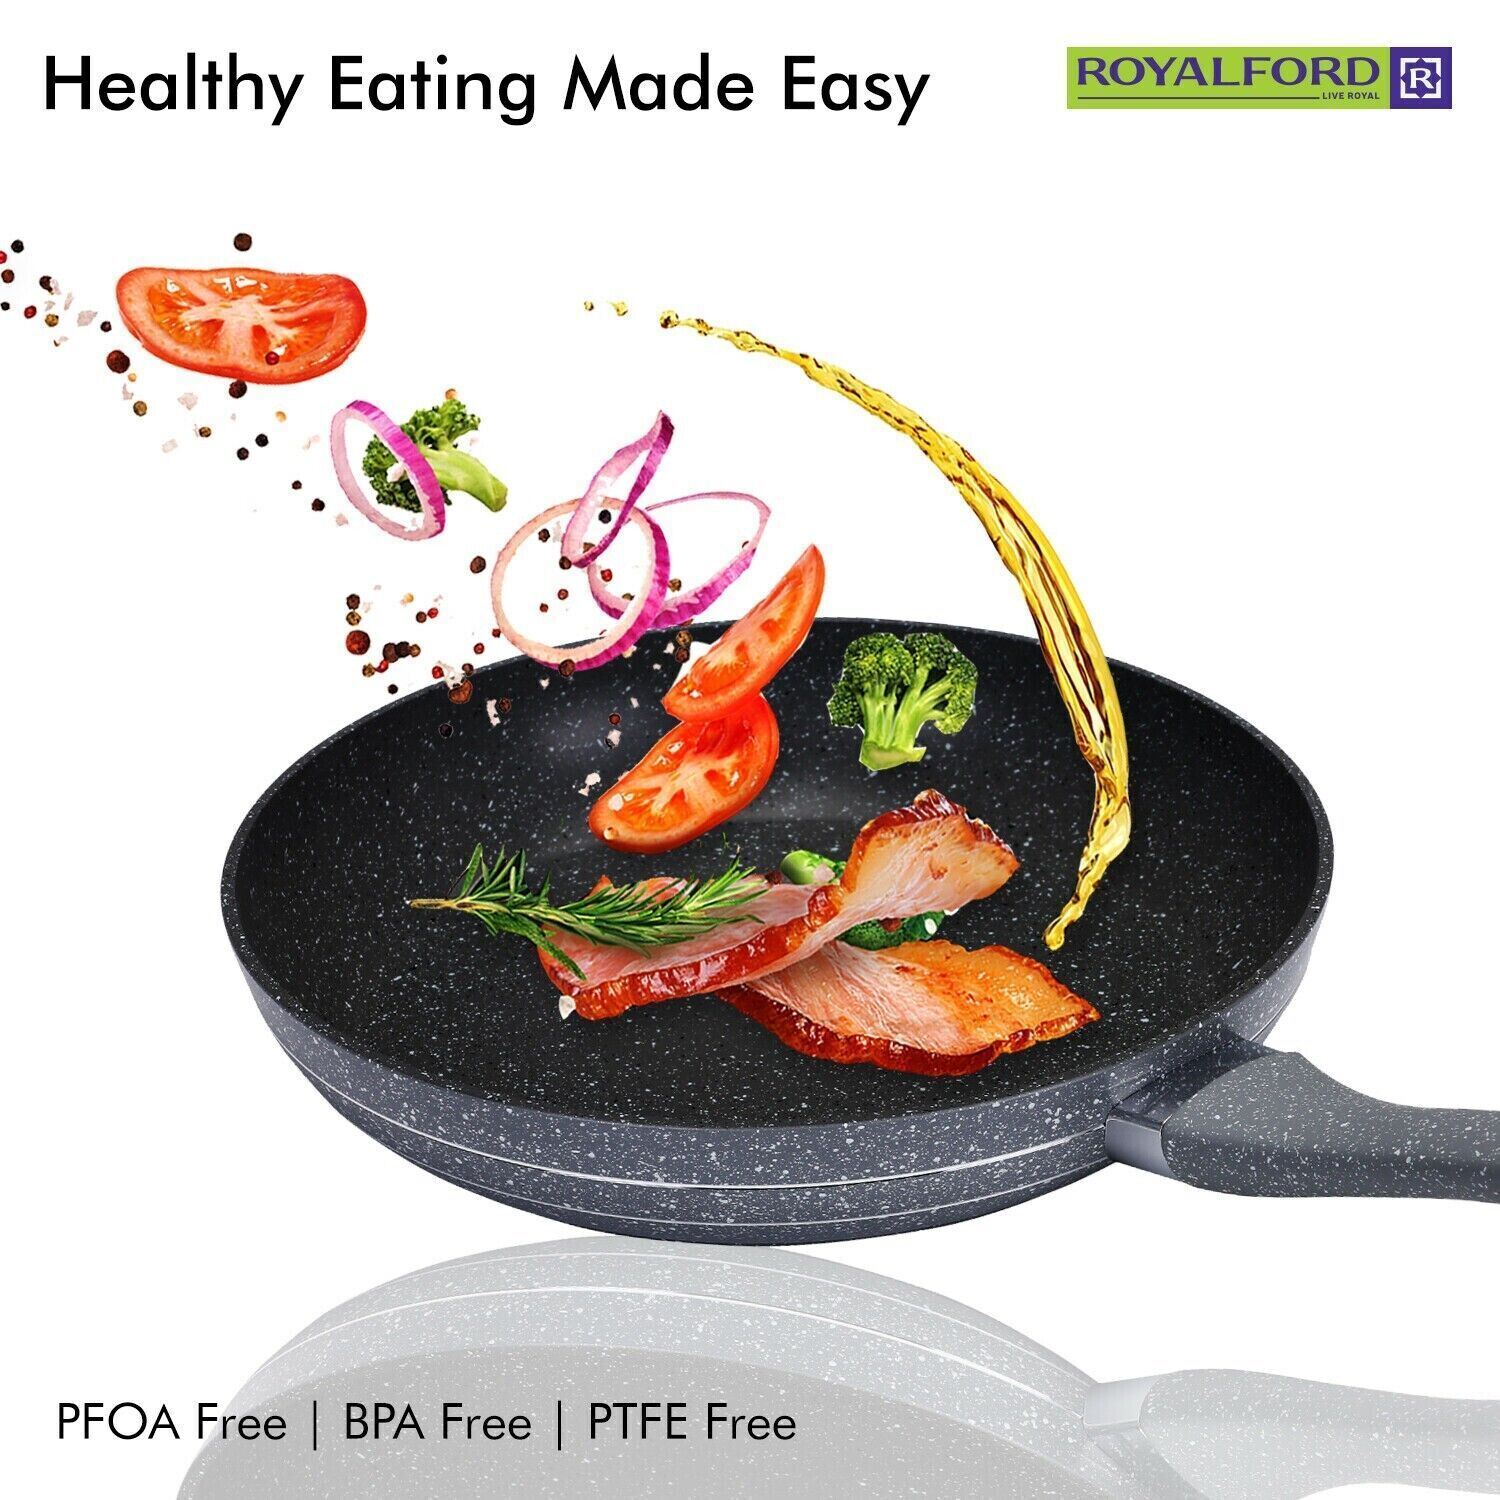 26cm Non-Stick Frying Pan with Durable Granite Coating